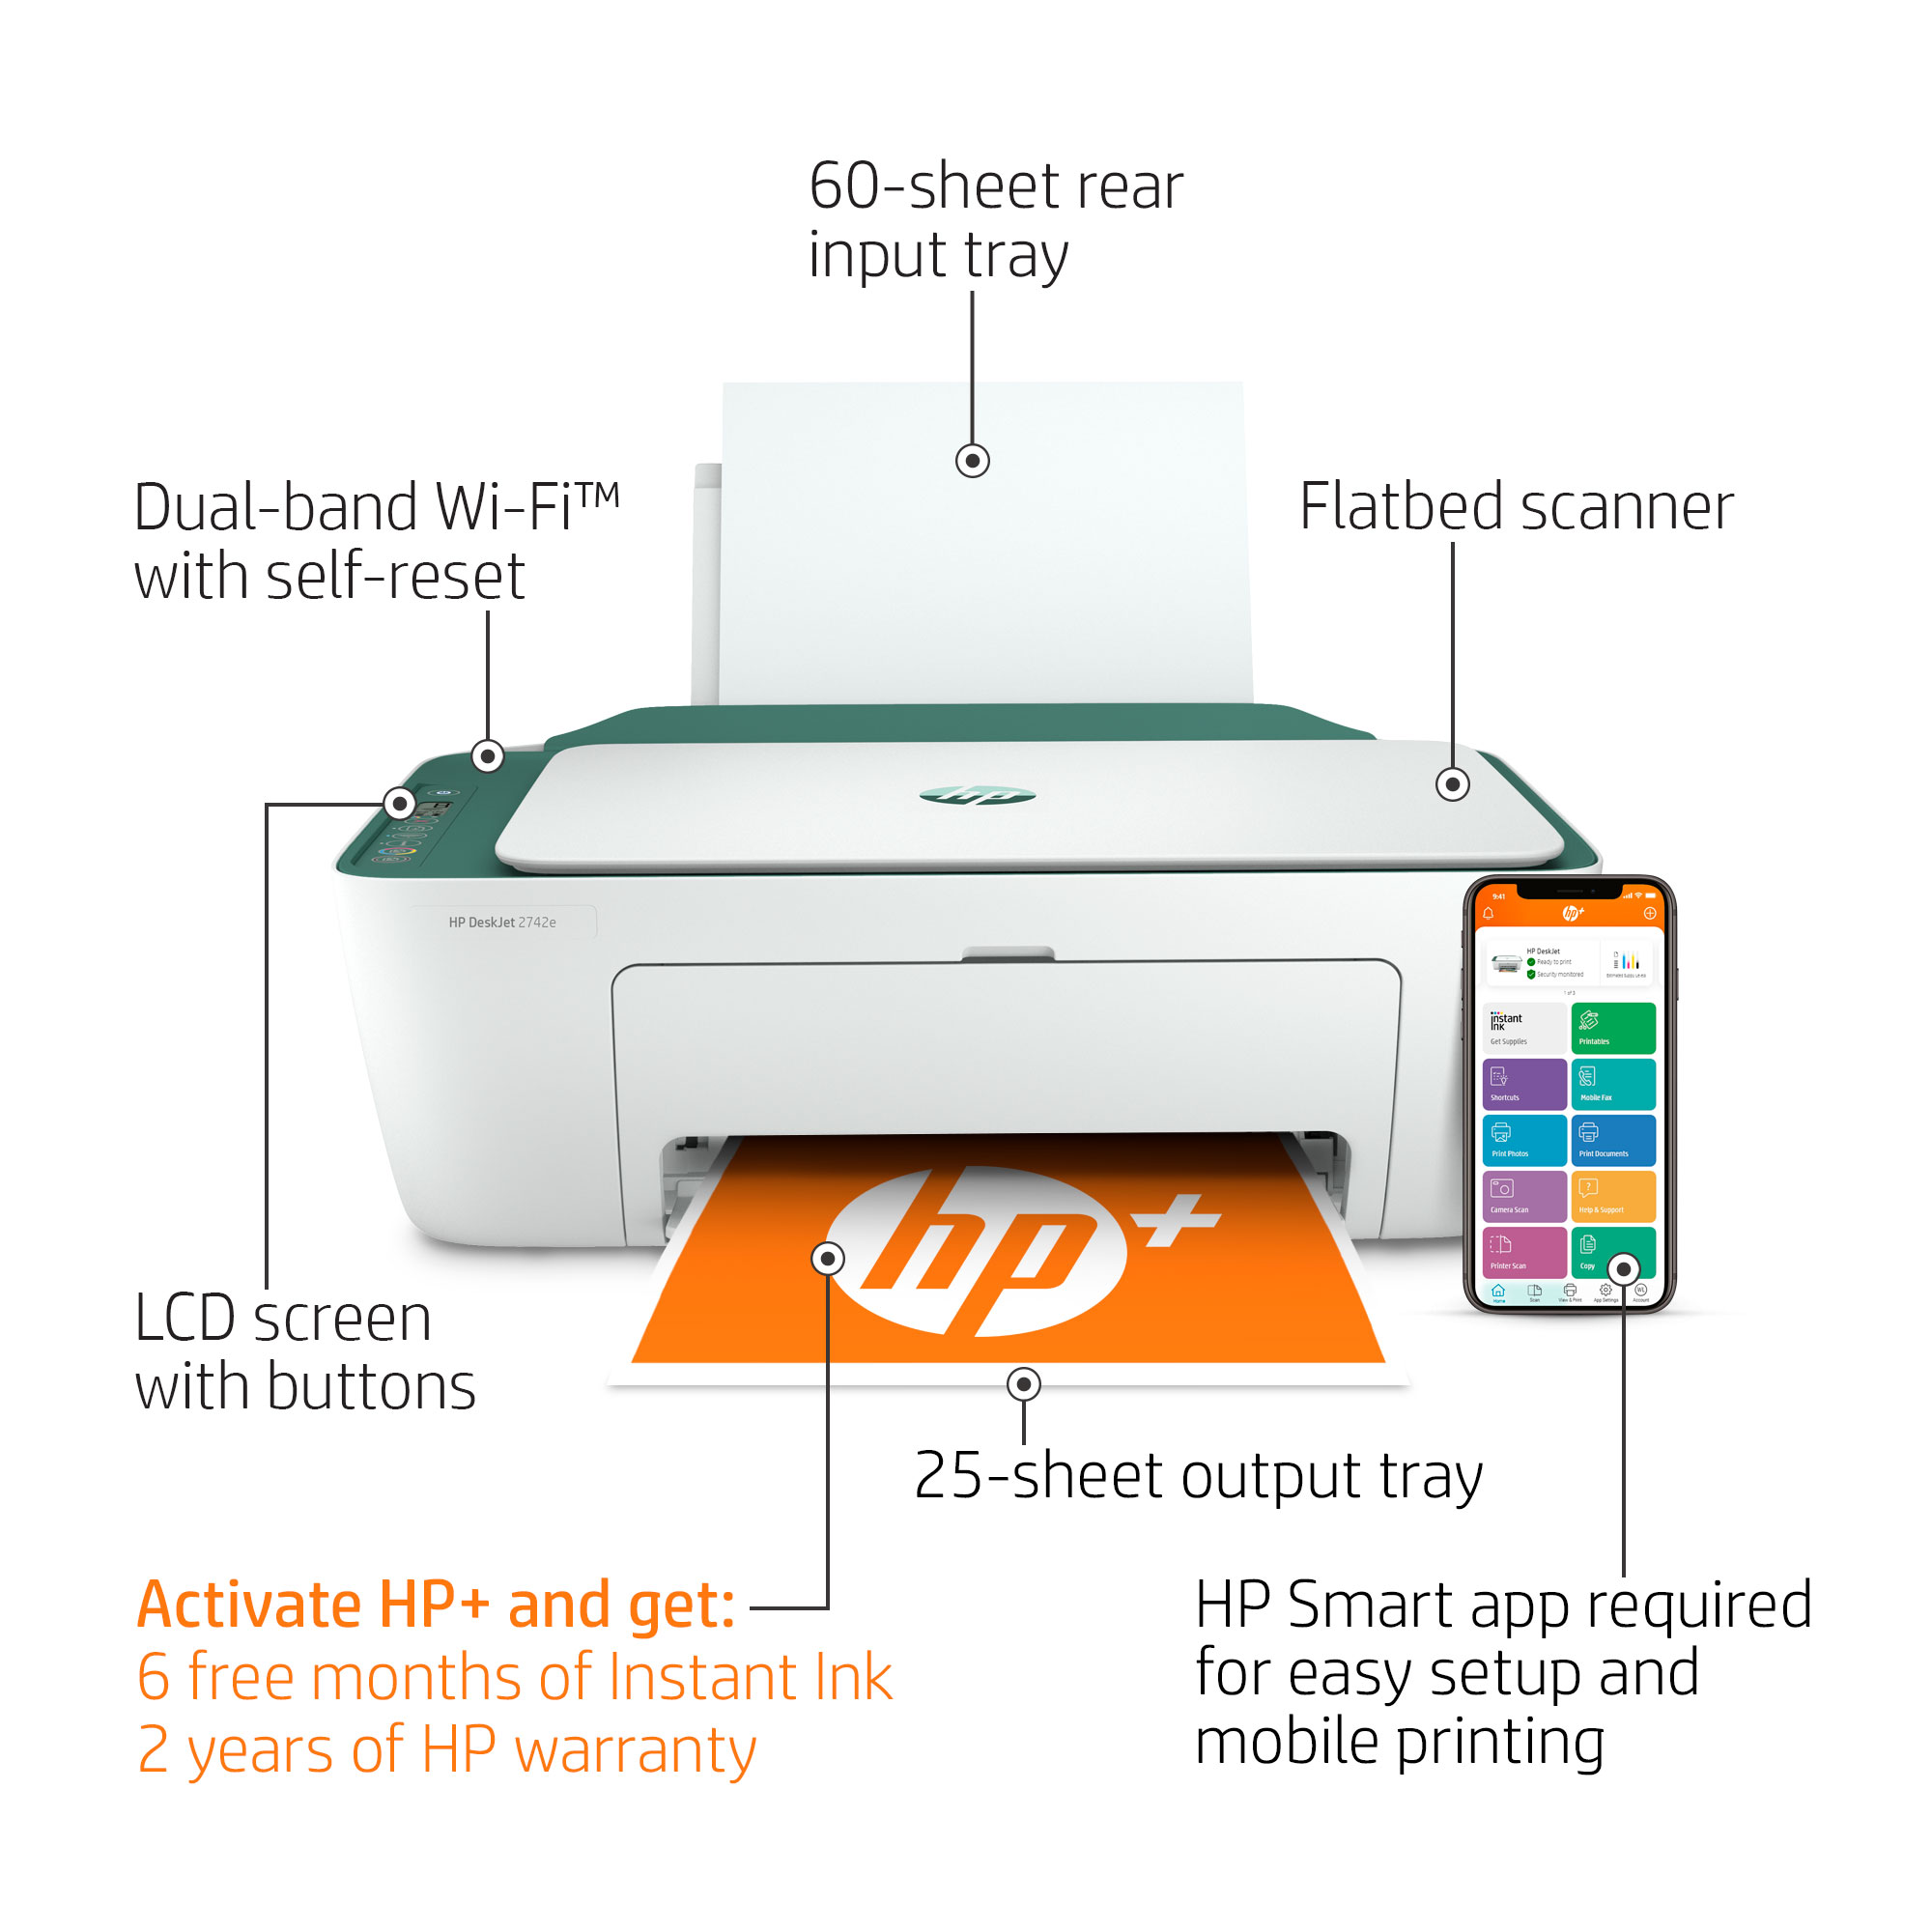 HP DeskJet 2742e All-in-One Wireless Color Inkjet Printer (Sequoia) - 6 months free Instant Ink with HP+ - image 2 of 10